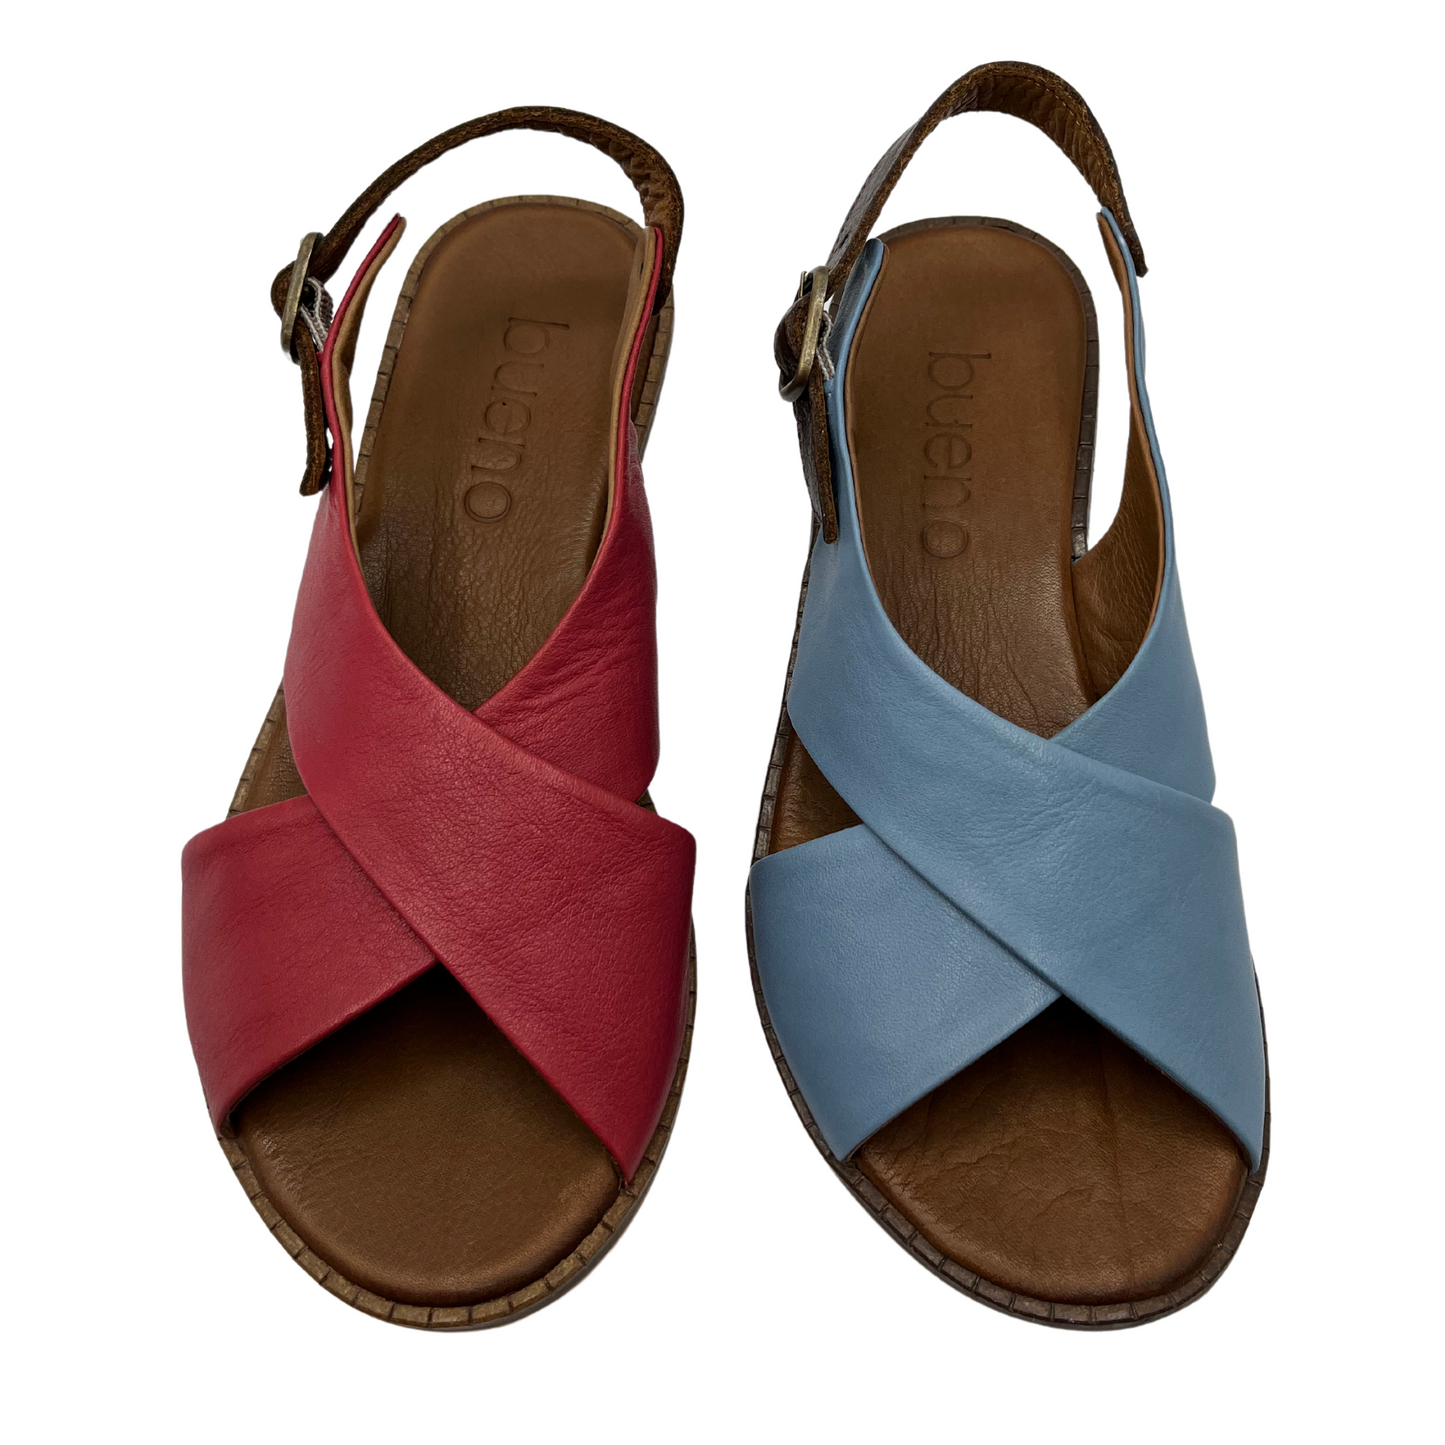 Top view of two leather sandals side by side. One is red and one is light blue. Both have a rounded toe and brown slingback strap